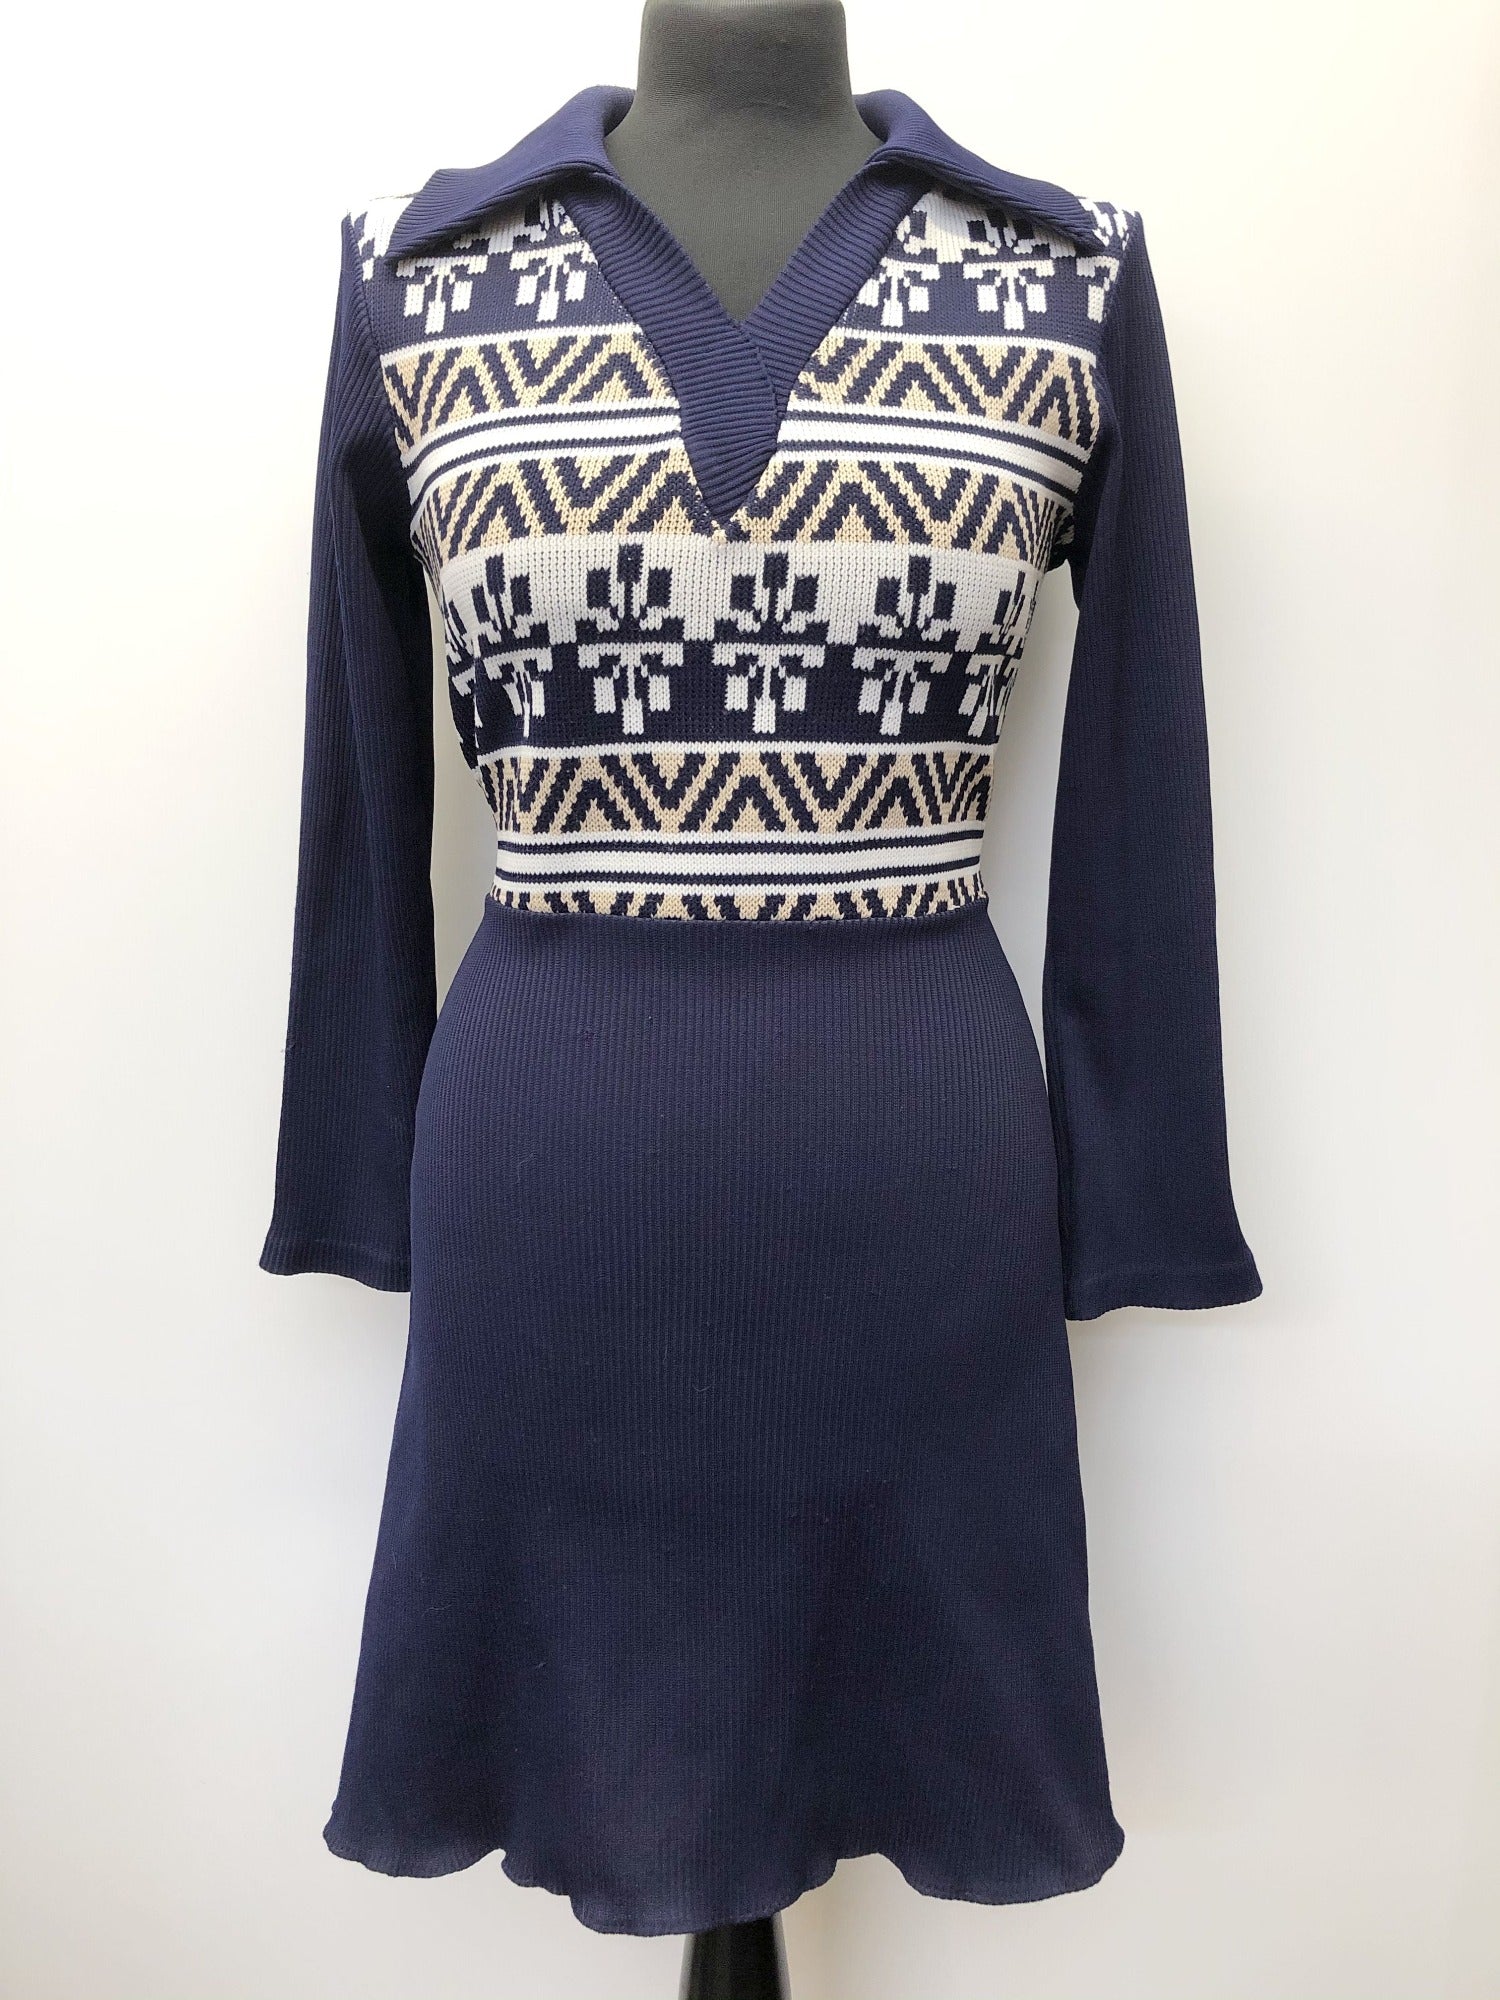 womens  vintage  V-Neck  printed  Navy  knit dress  fit and flare  dress  Collar  Blue  70s  1970s  10/12